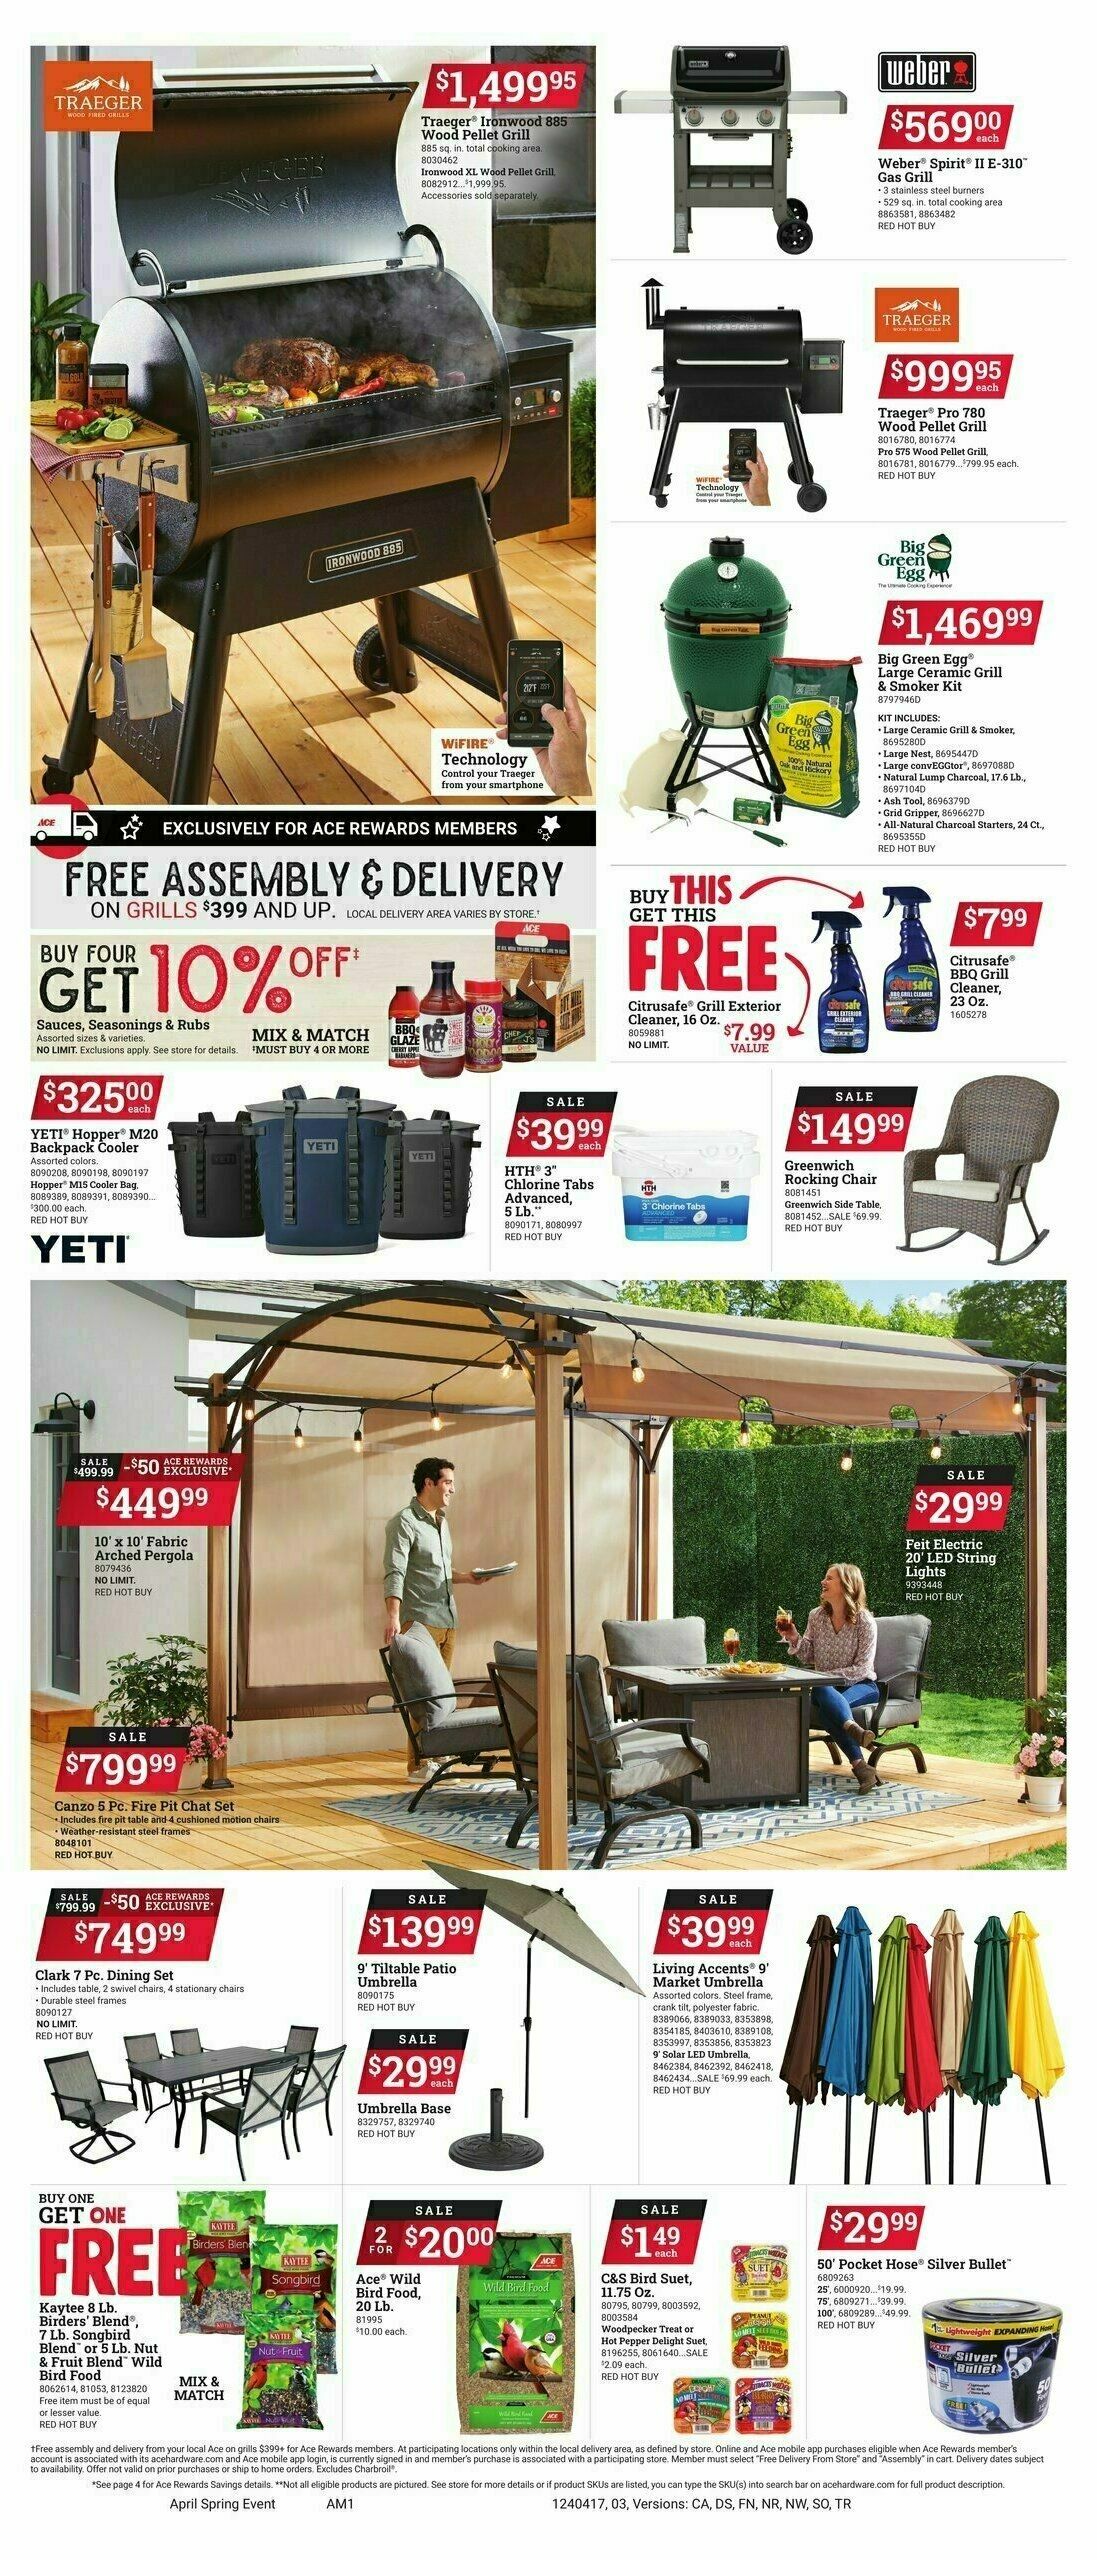 Ace Hardware April Spring Event Weekly Ad from April 17